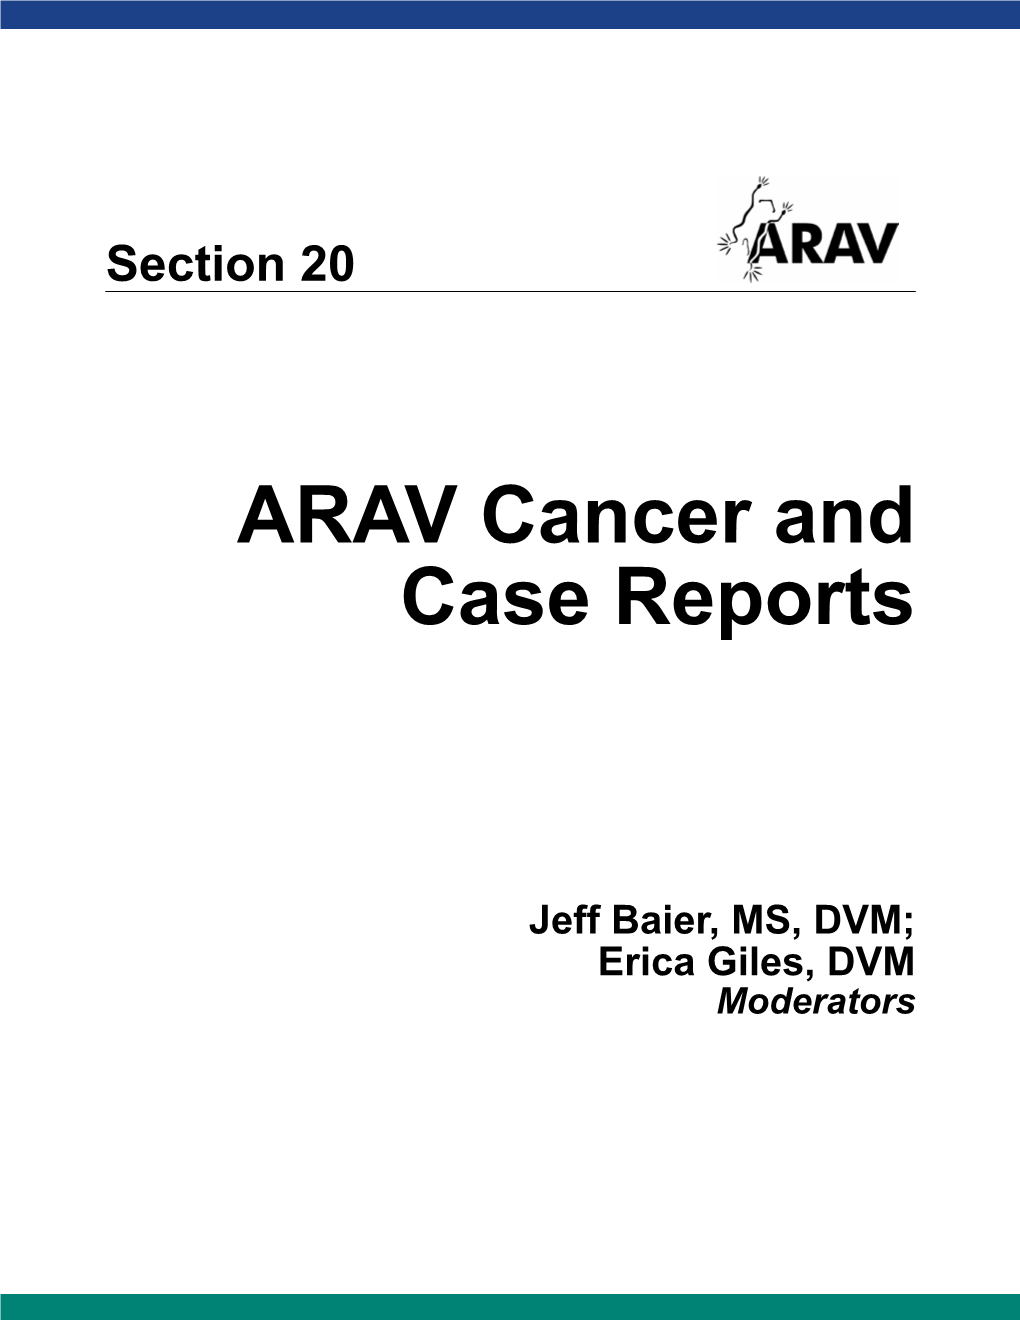 ARAV Cancer and Case Reports